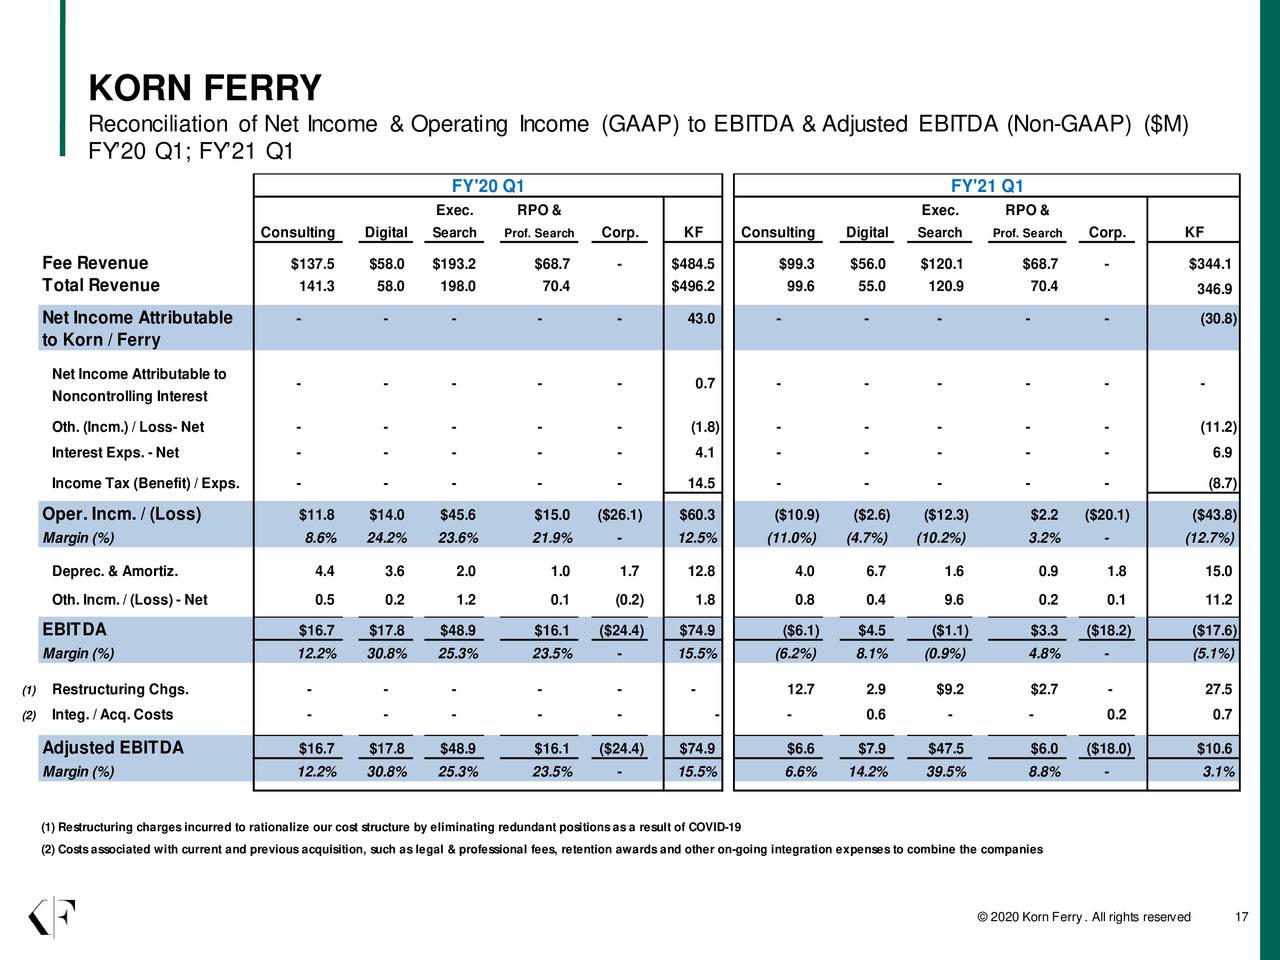 Korn Ferry 2021 Q1 Results Earnings Call Presentation (NYSE:KFY